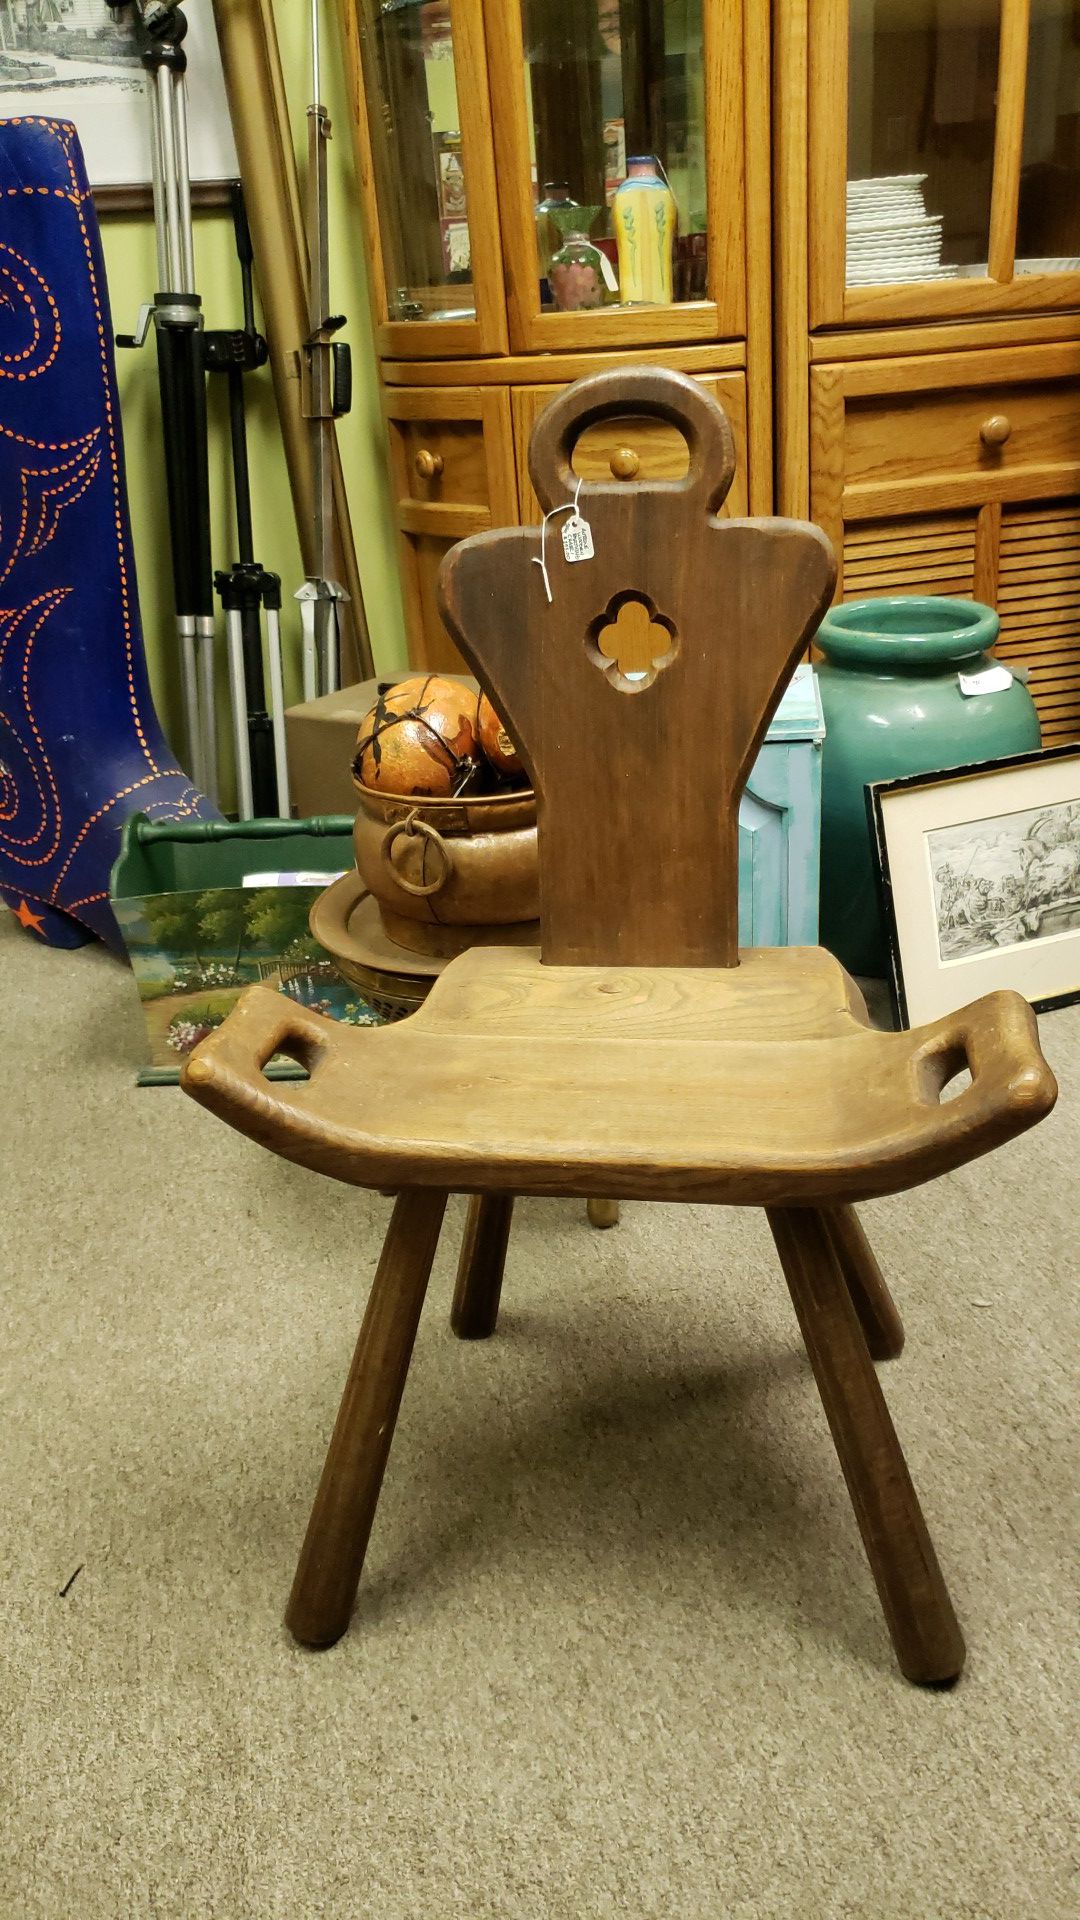 Antique Wooden Birthing Chair/Stool